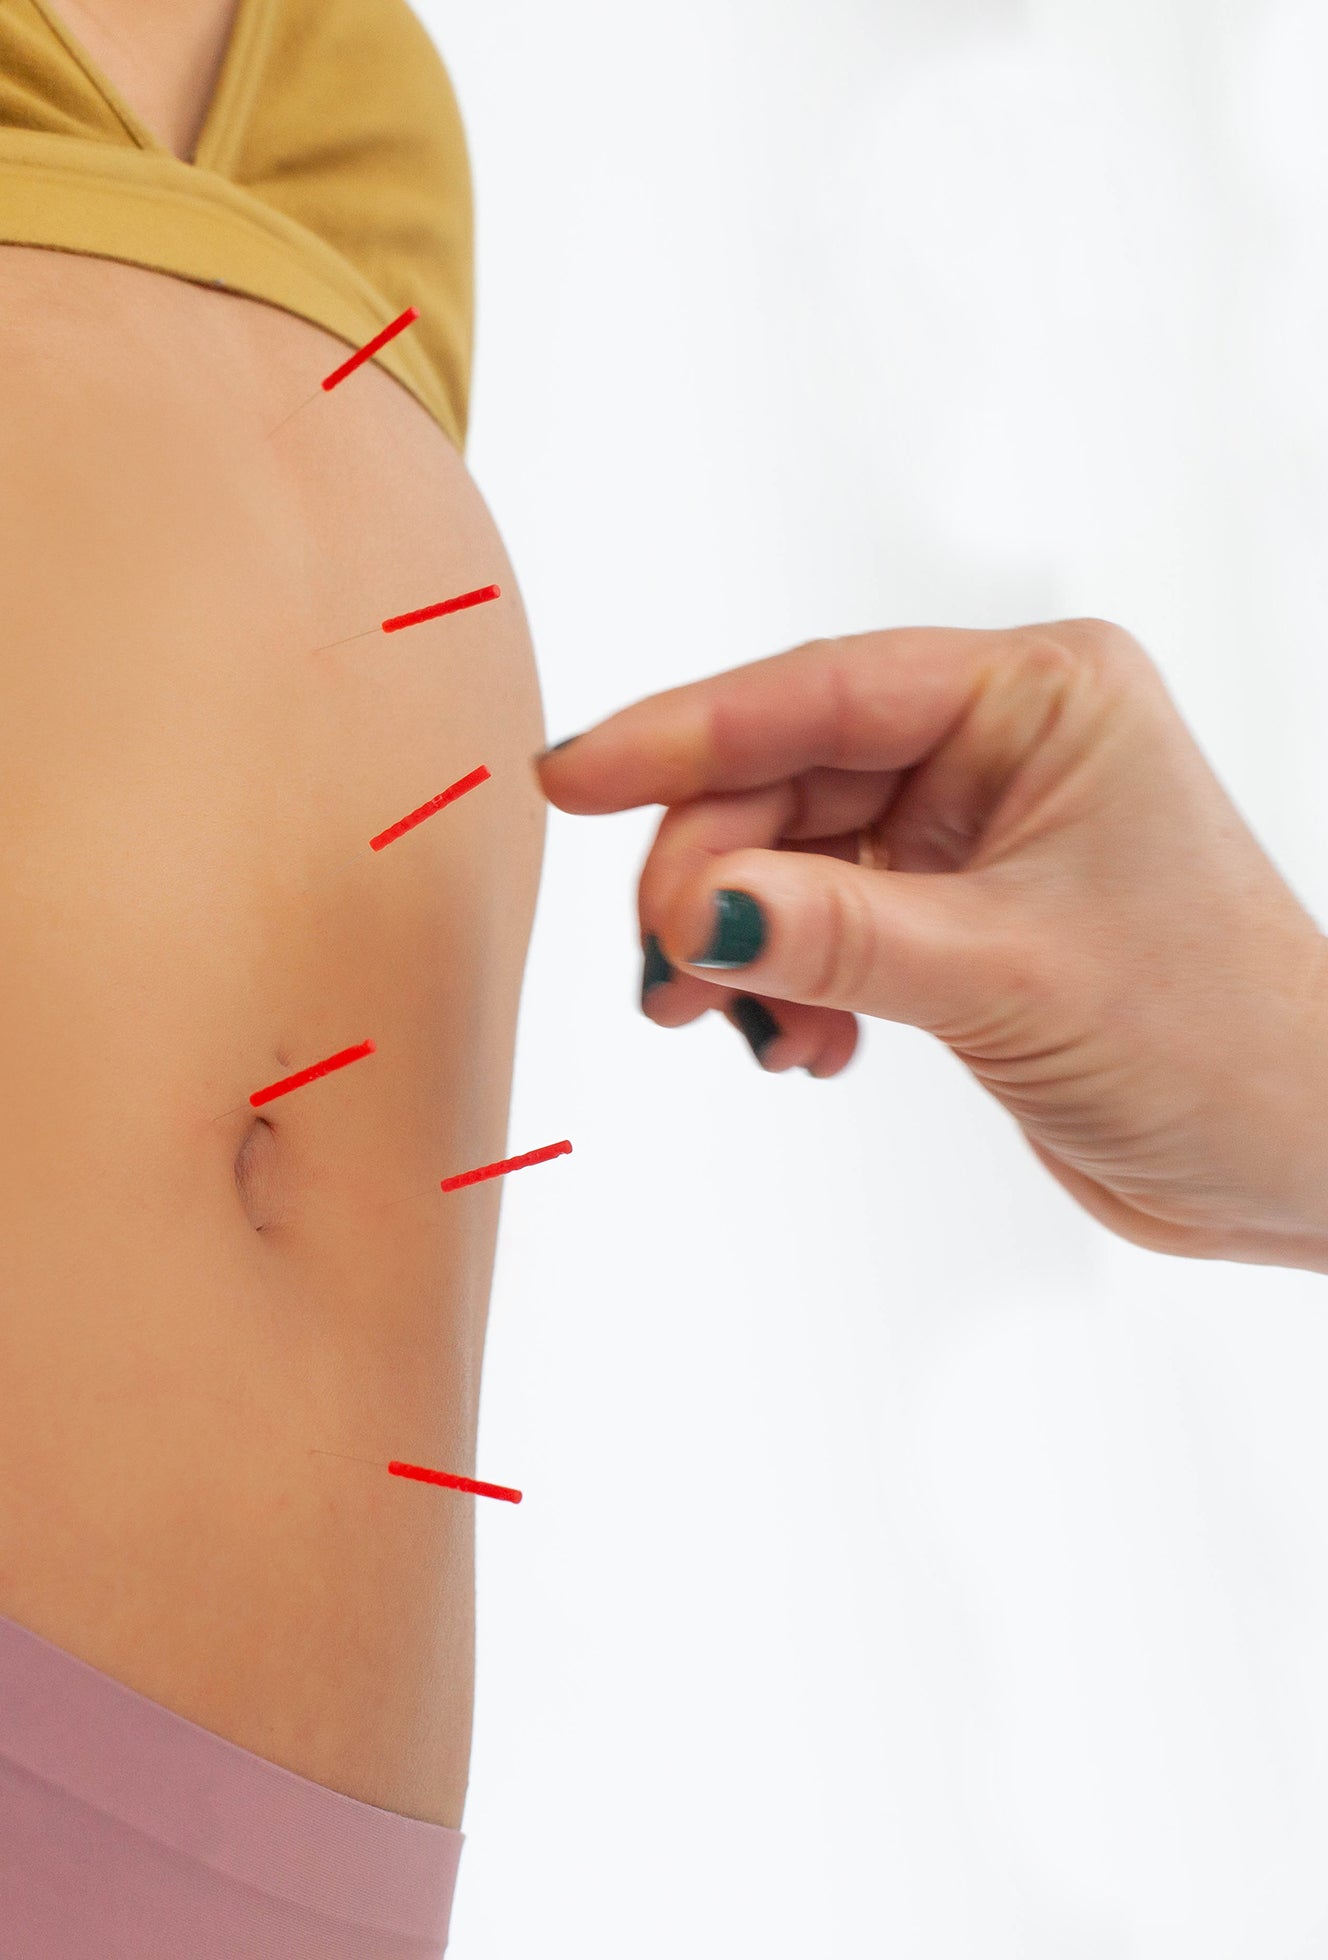 Dry Needling vs Acupuncture: What's the Difference?